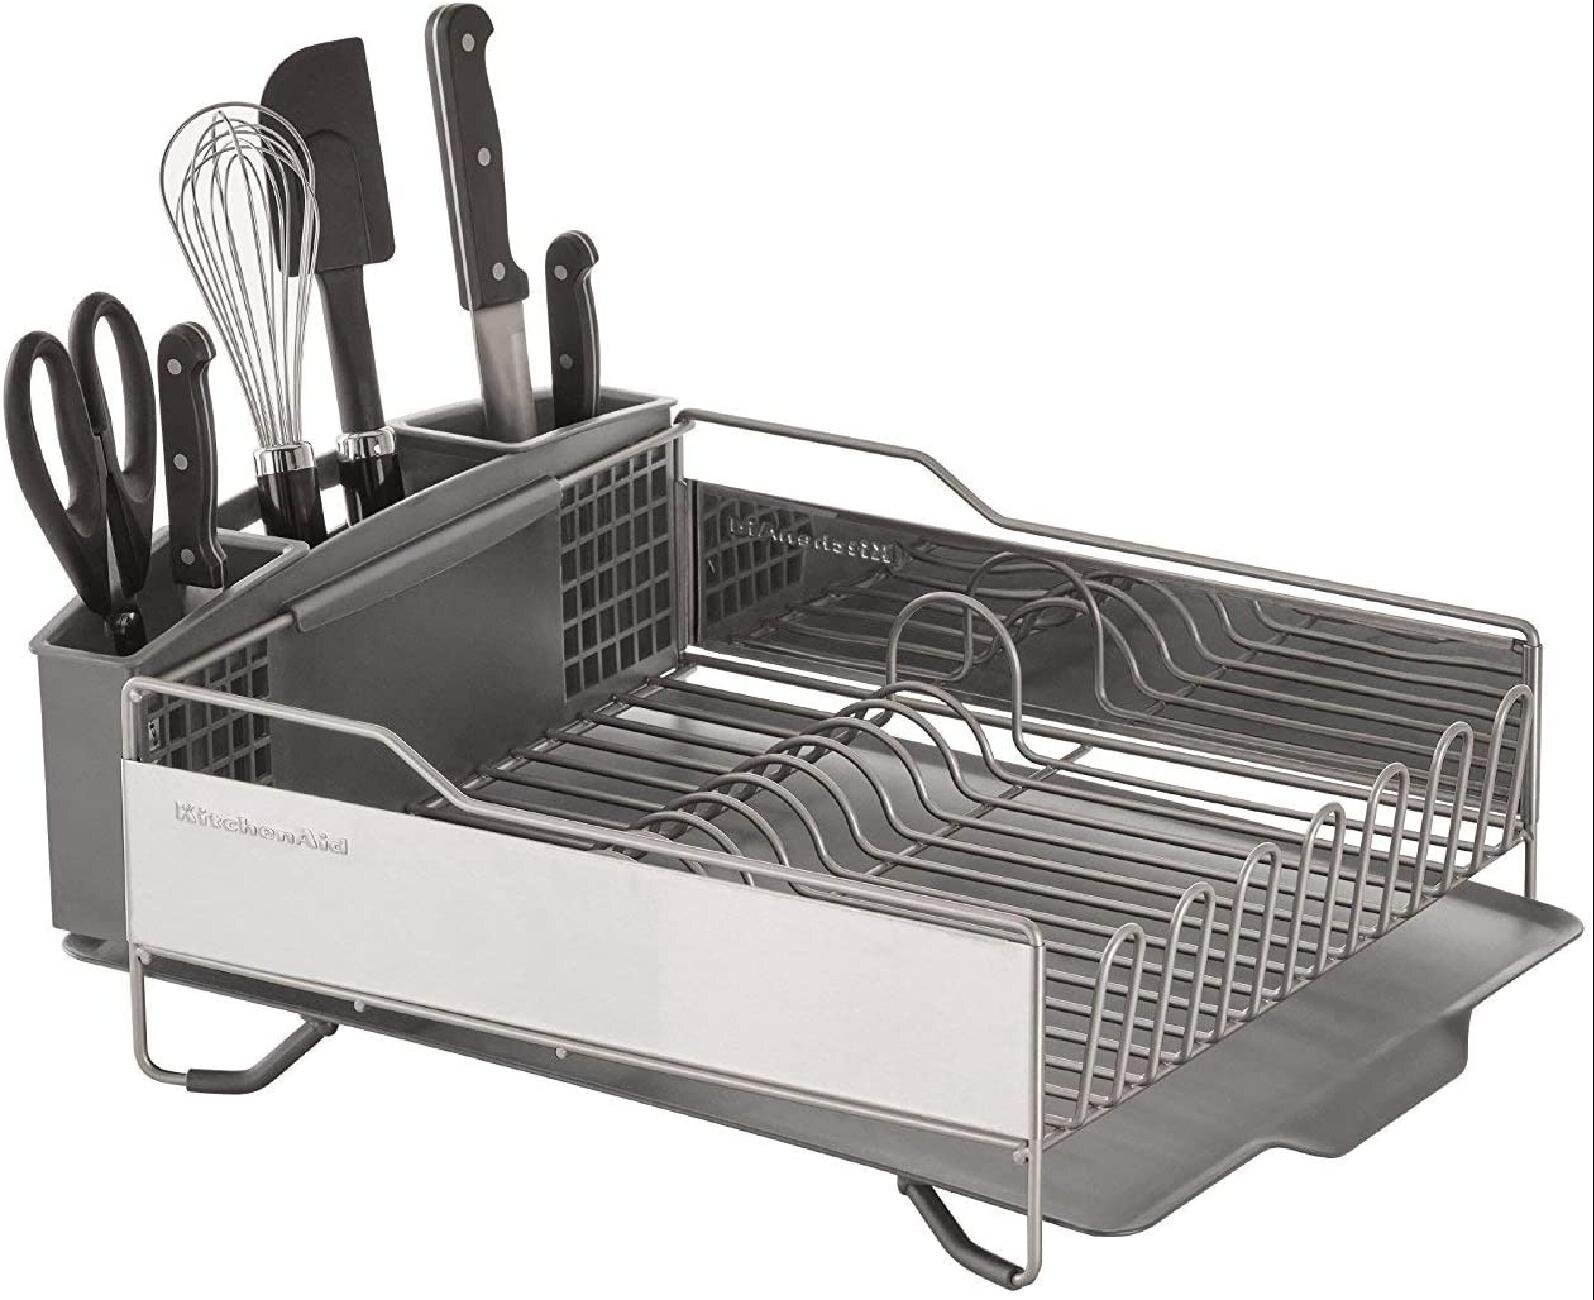 GSlife Dish Drying Rack with Drainboard - Dish Racks for Kitchen Counter,  No Drain Spout, Dish Drainer with Utensil Holder, Gold and Black